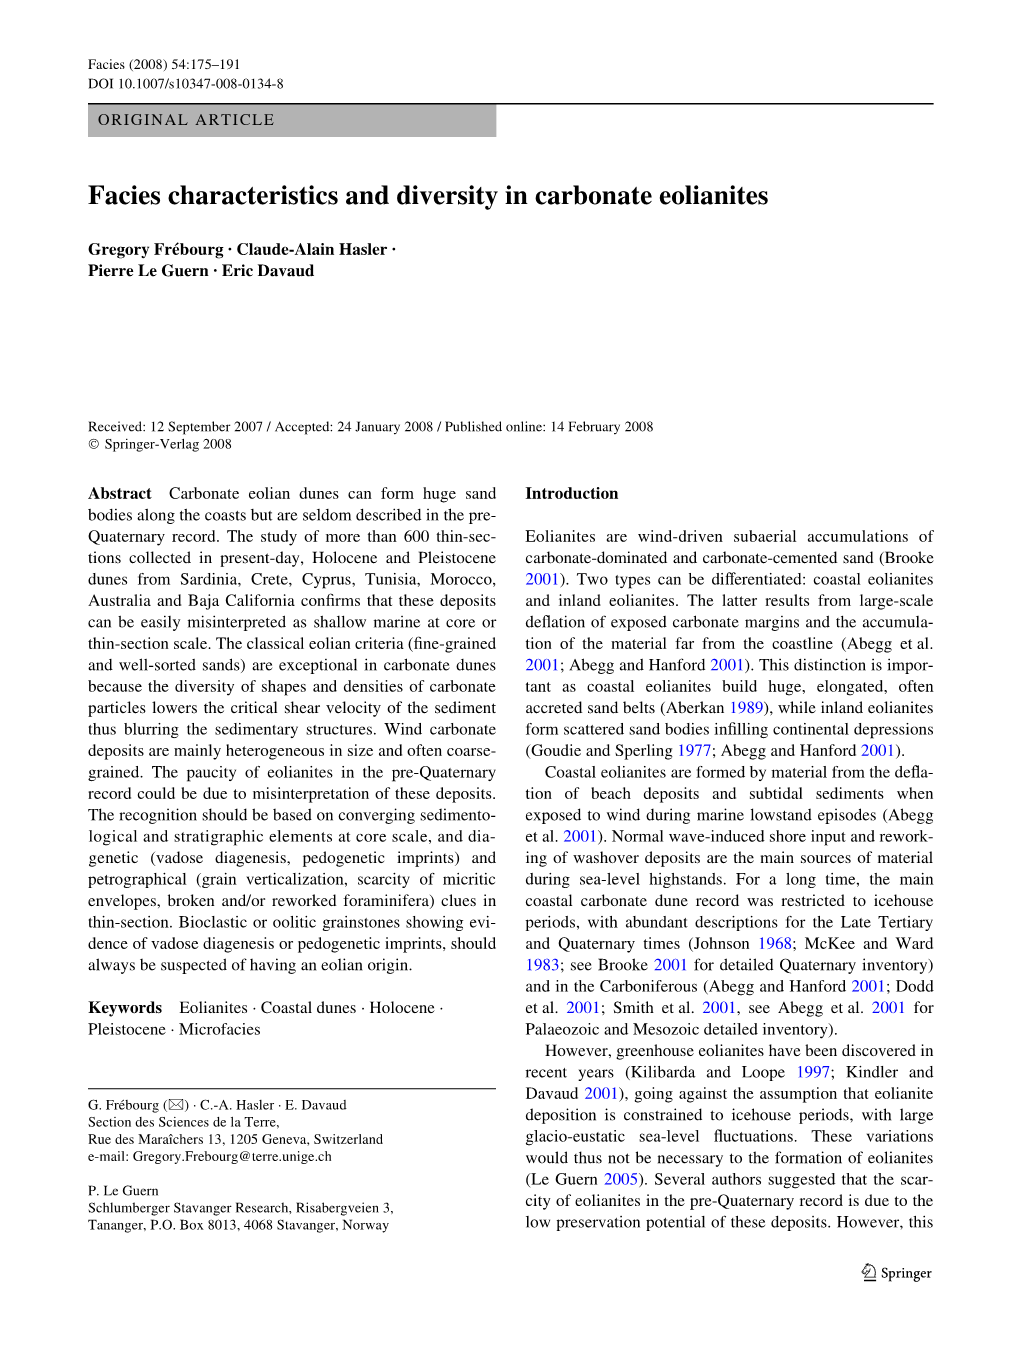 Facies Characteristics and Diversity in Carbonate Eolianites